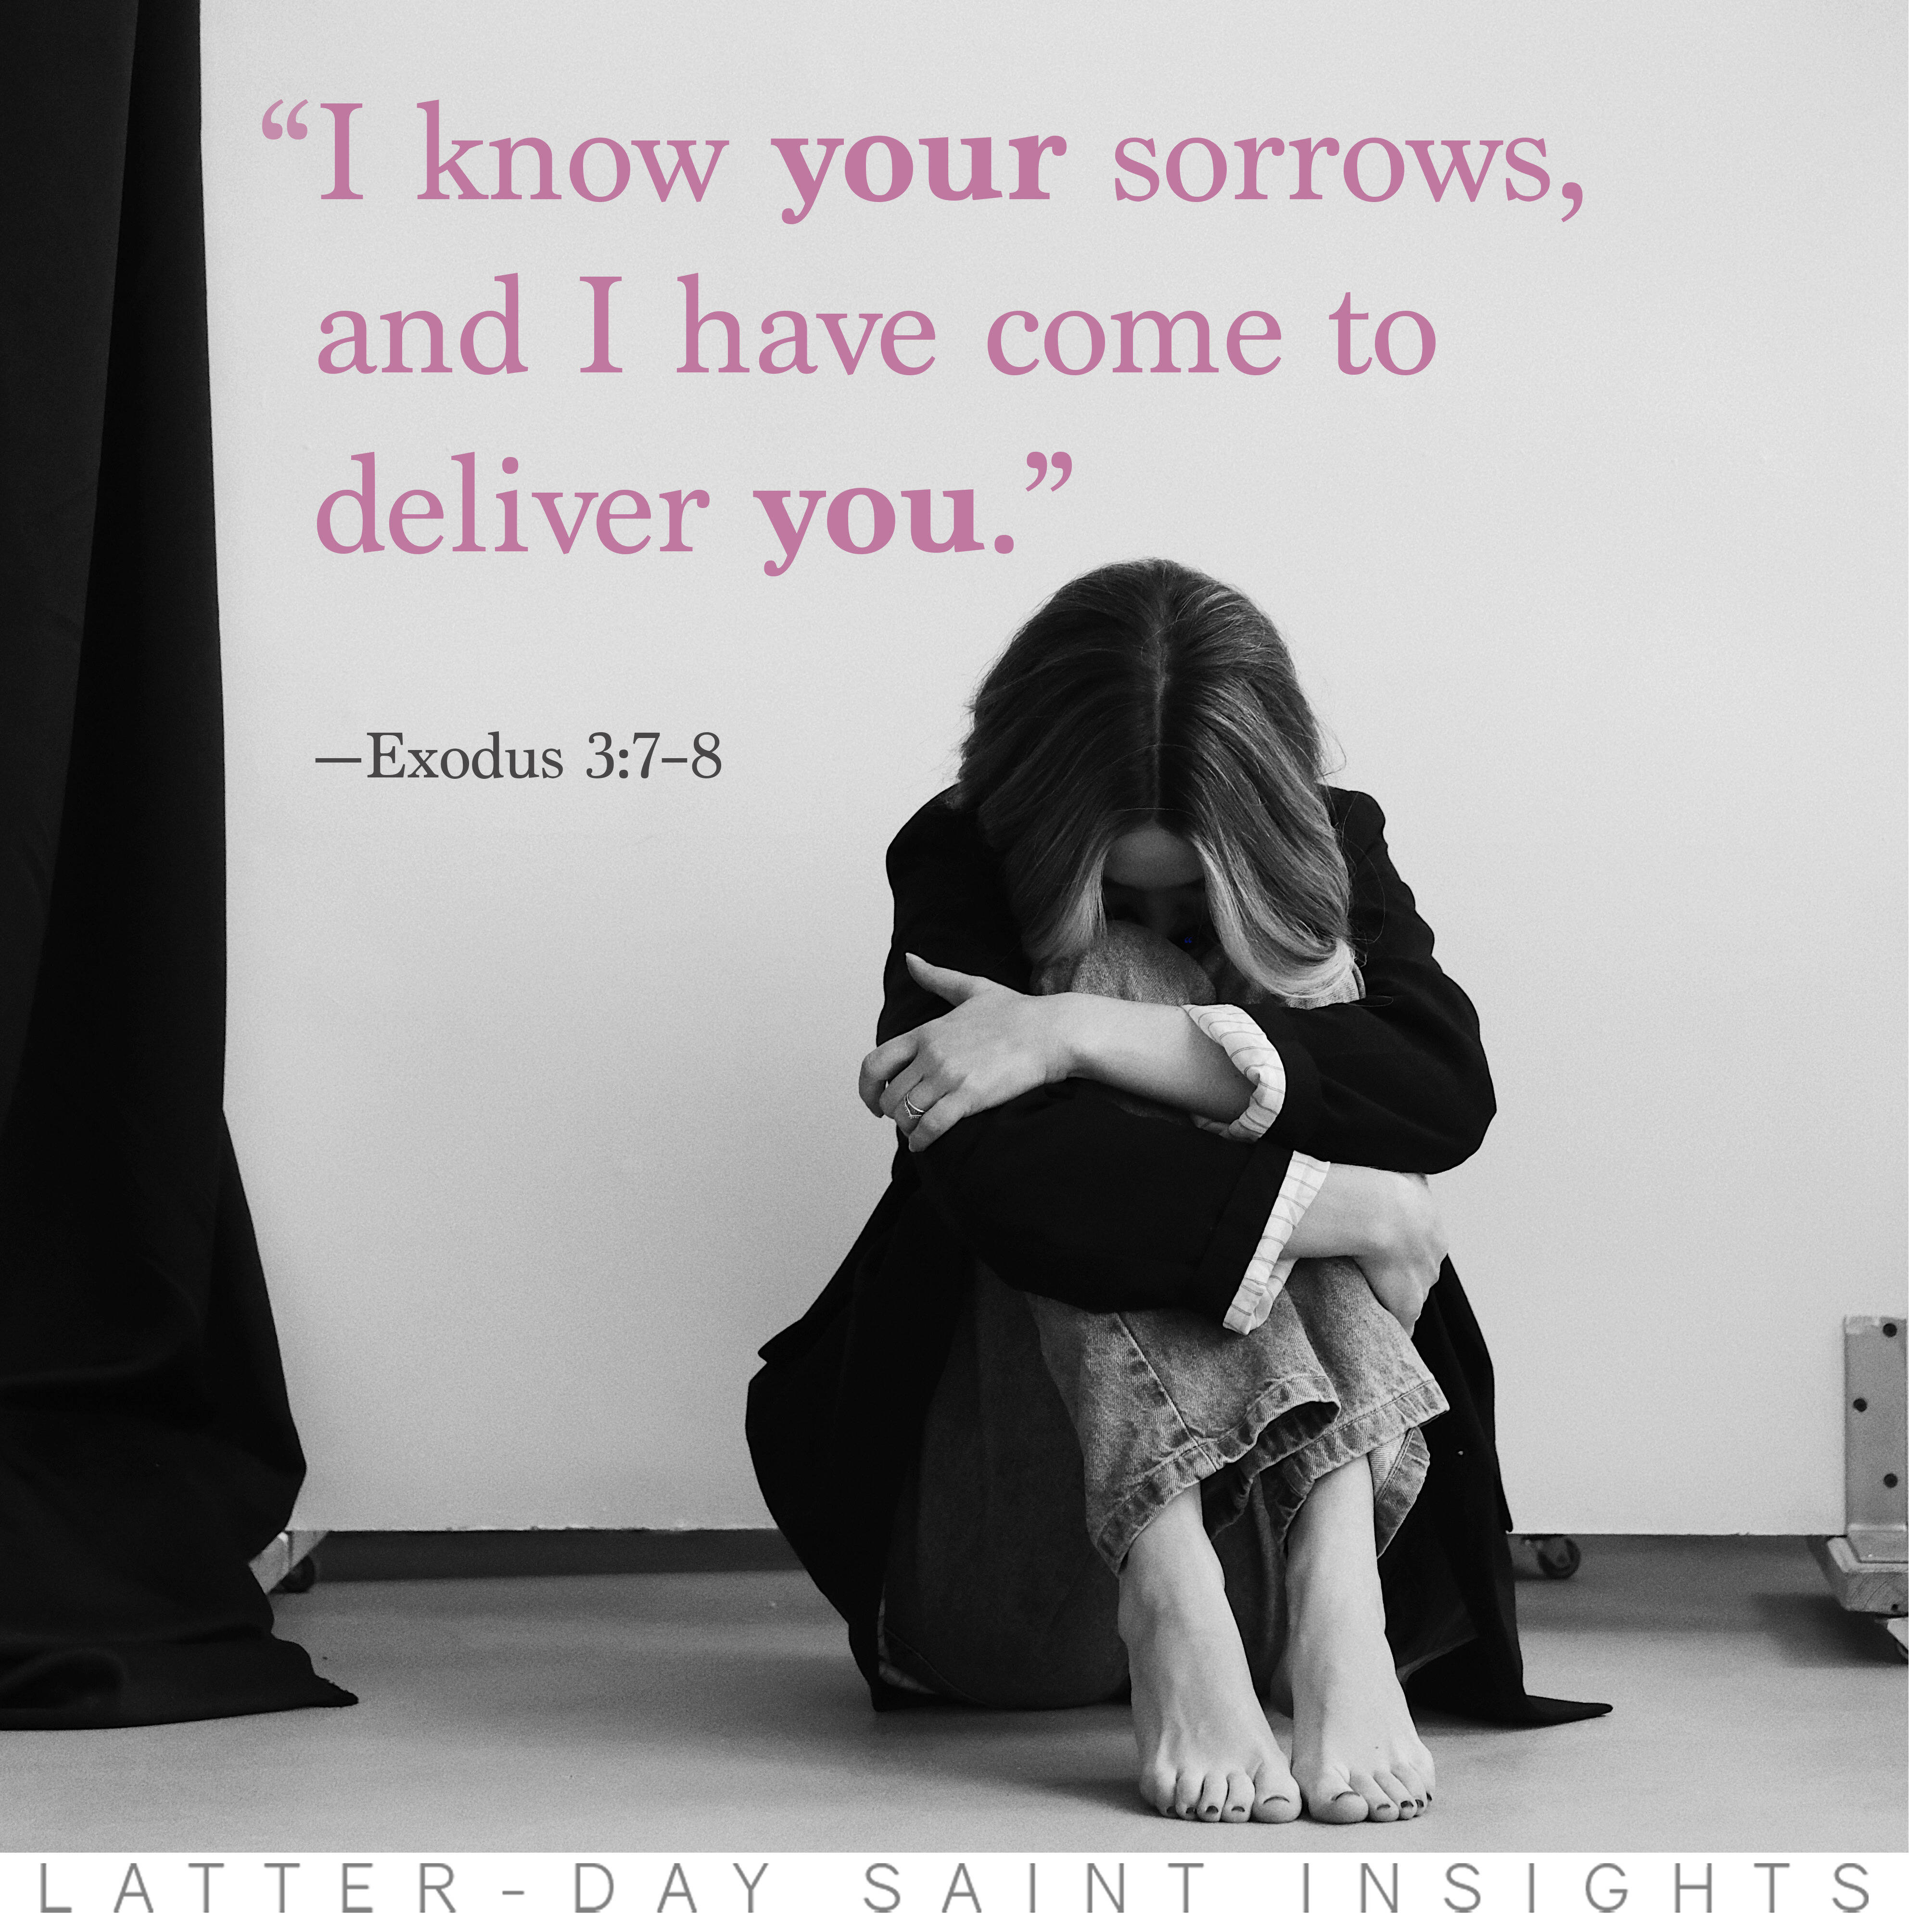 "I know your sorrows, and I have come to deliver you." Exodus 3:7–8. Girl in fetal position.